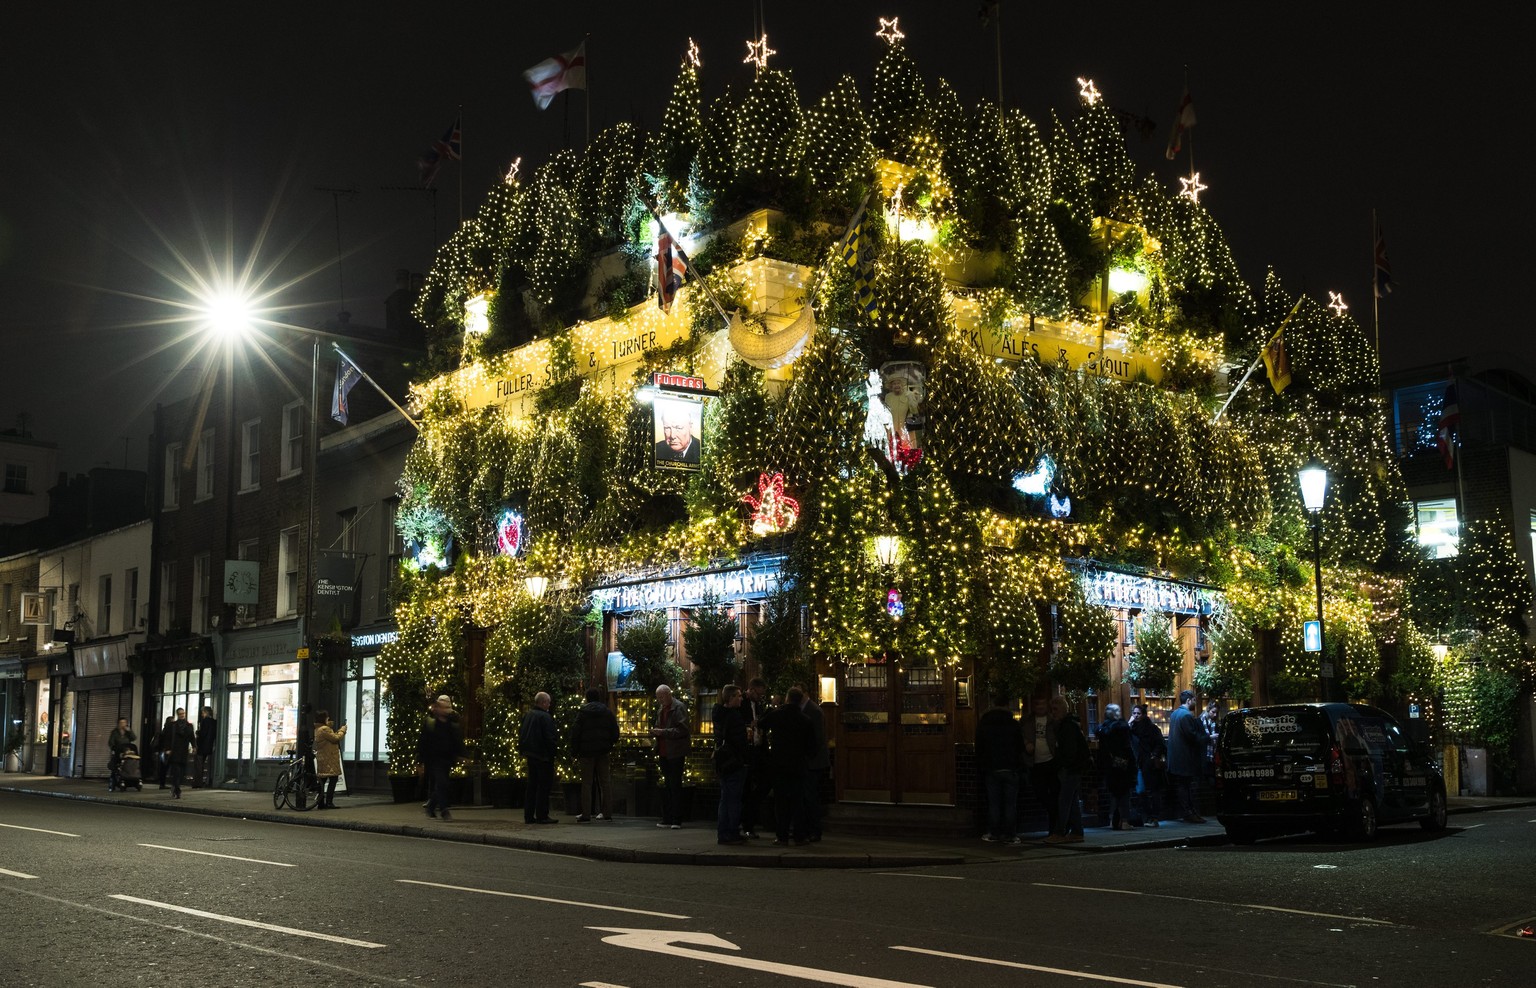 epa05678748 A popular pub in Notting Hill, The Churchill Arms, is decorated with a total of 21,000 lights and 90 Christmas trees. The pub in Kensington is famous for the festive display it puts on eac ...